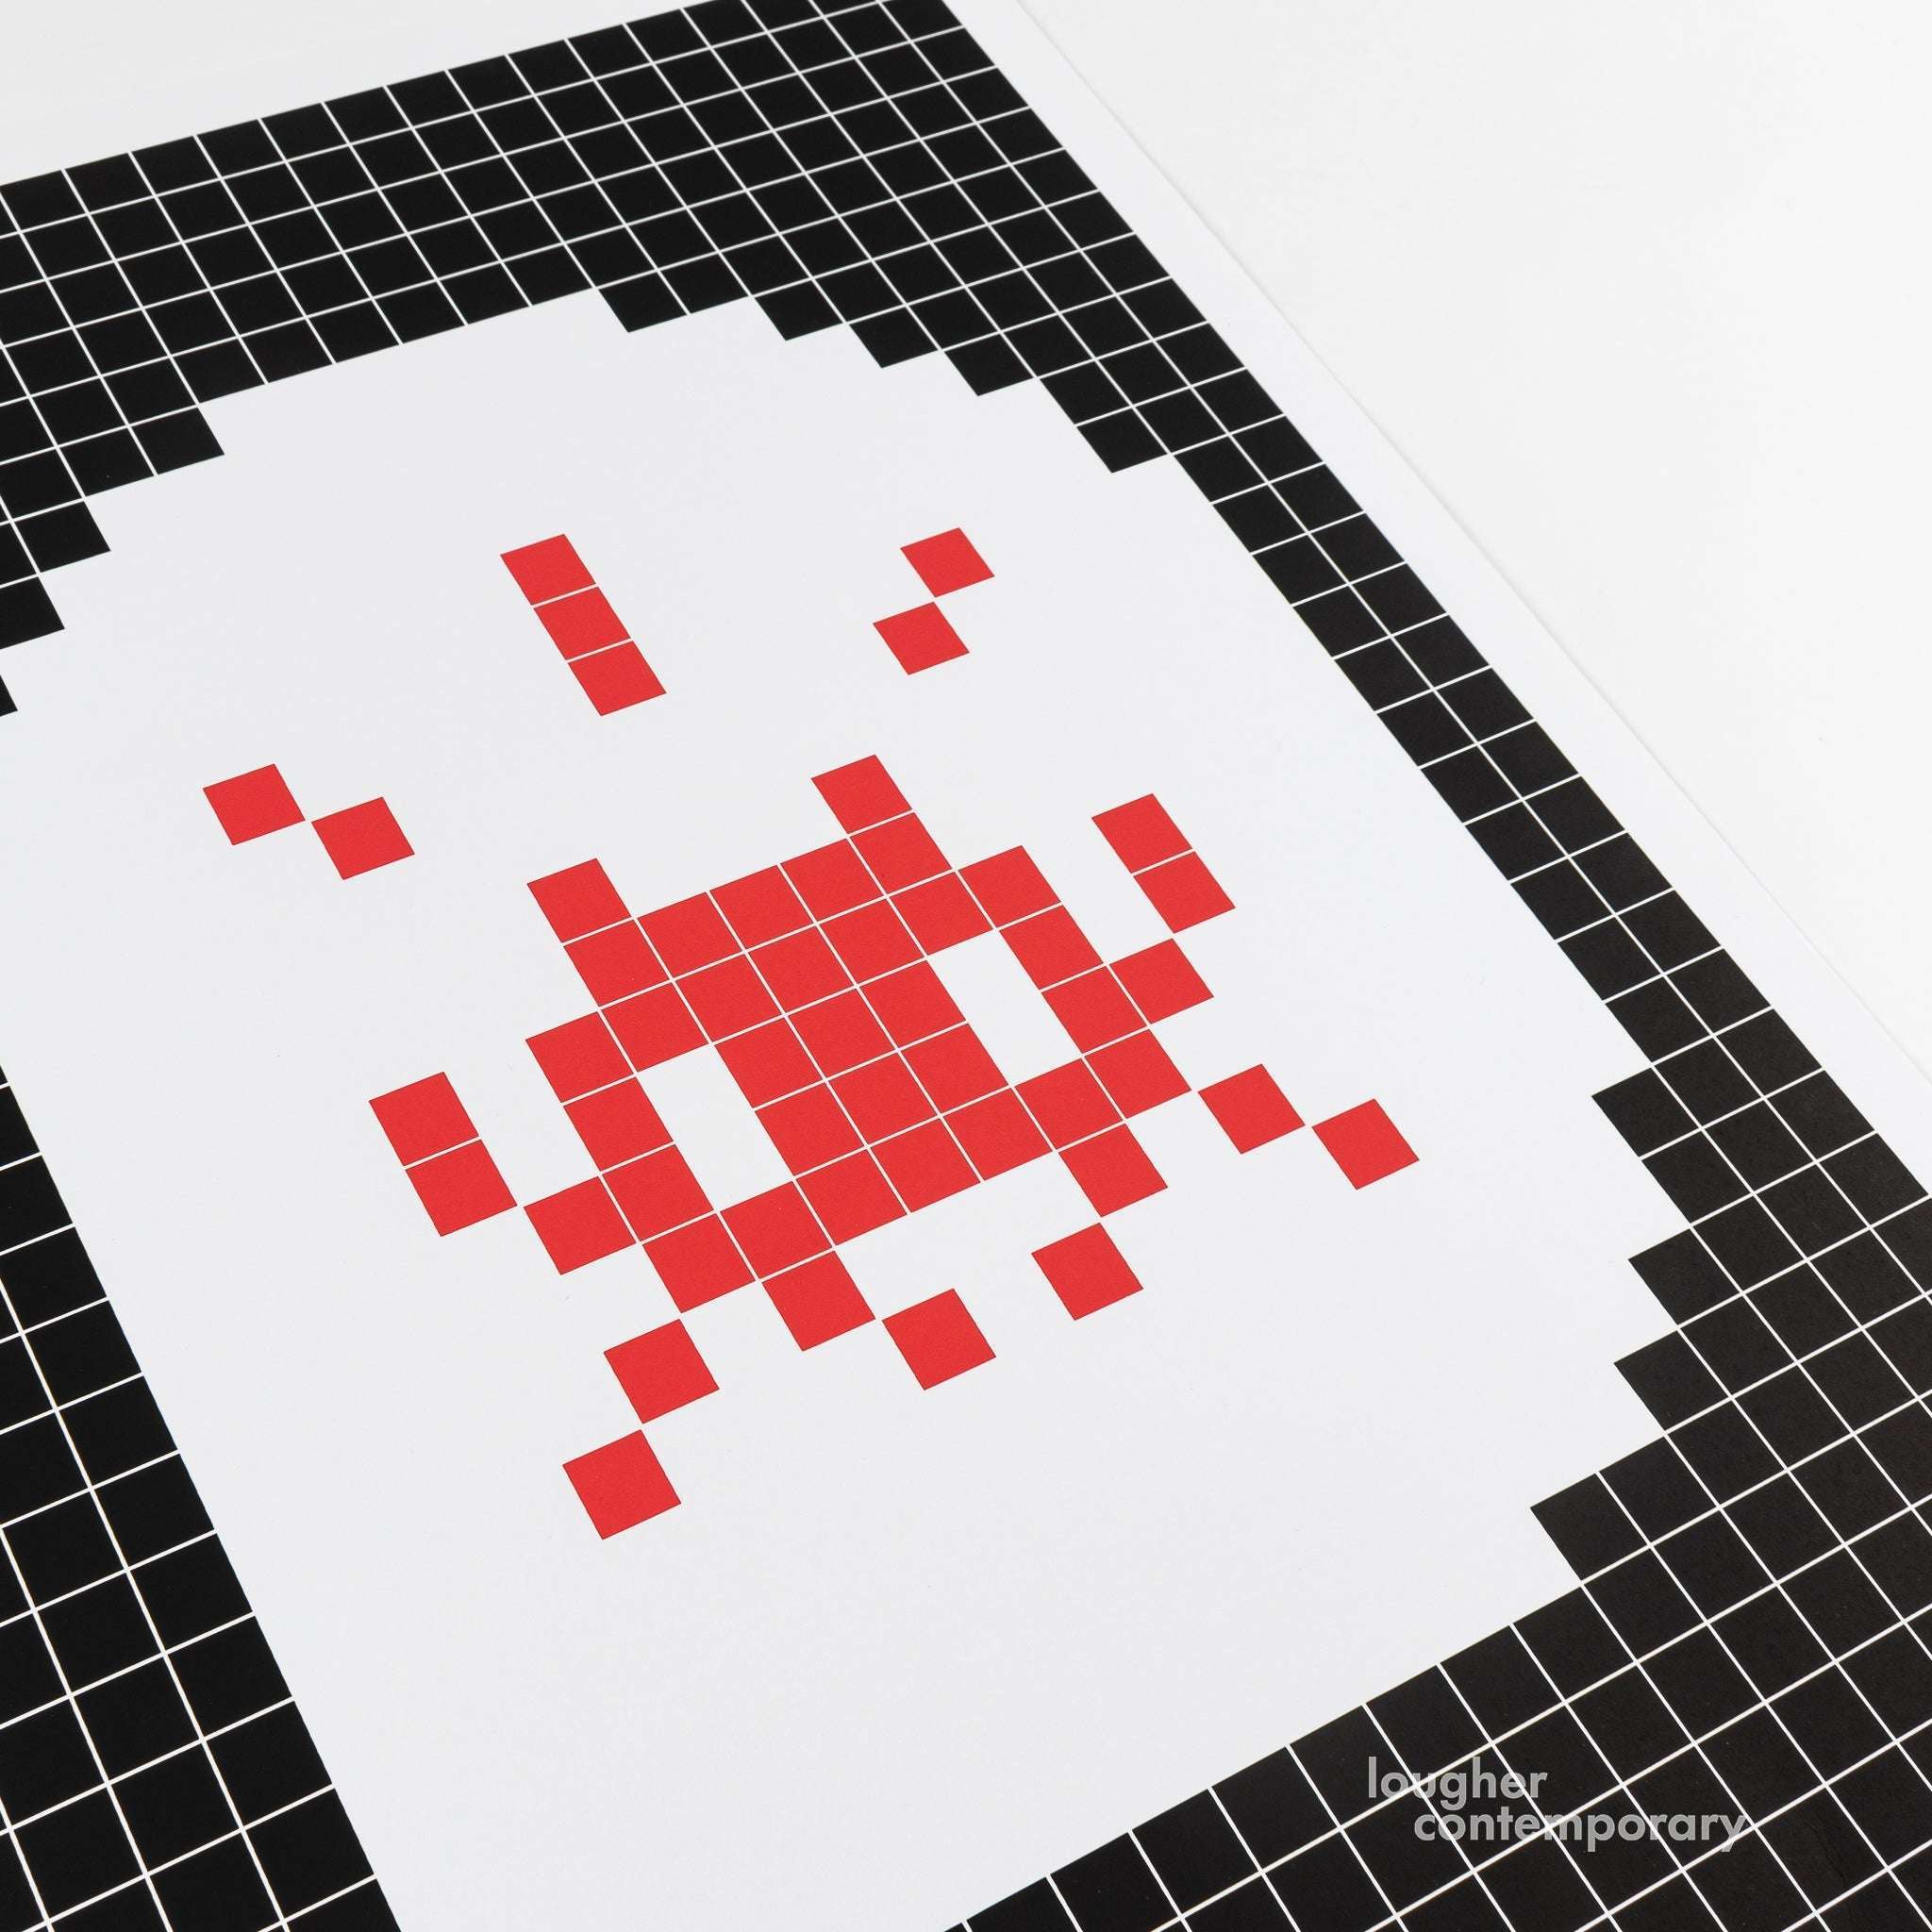 Invader grid print For Sale - Lougher Contemporary